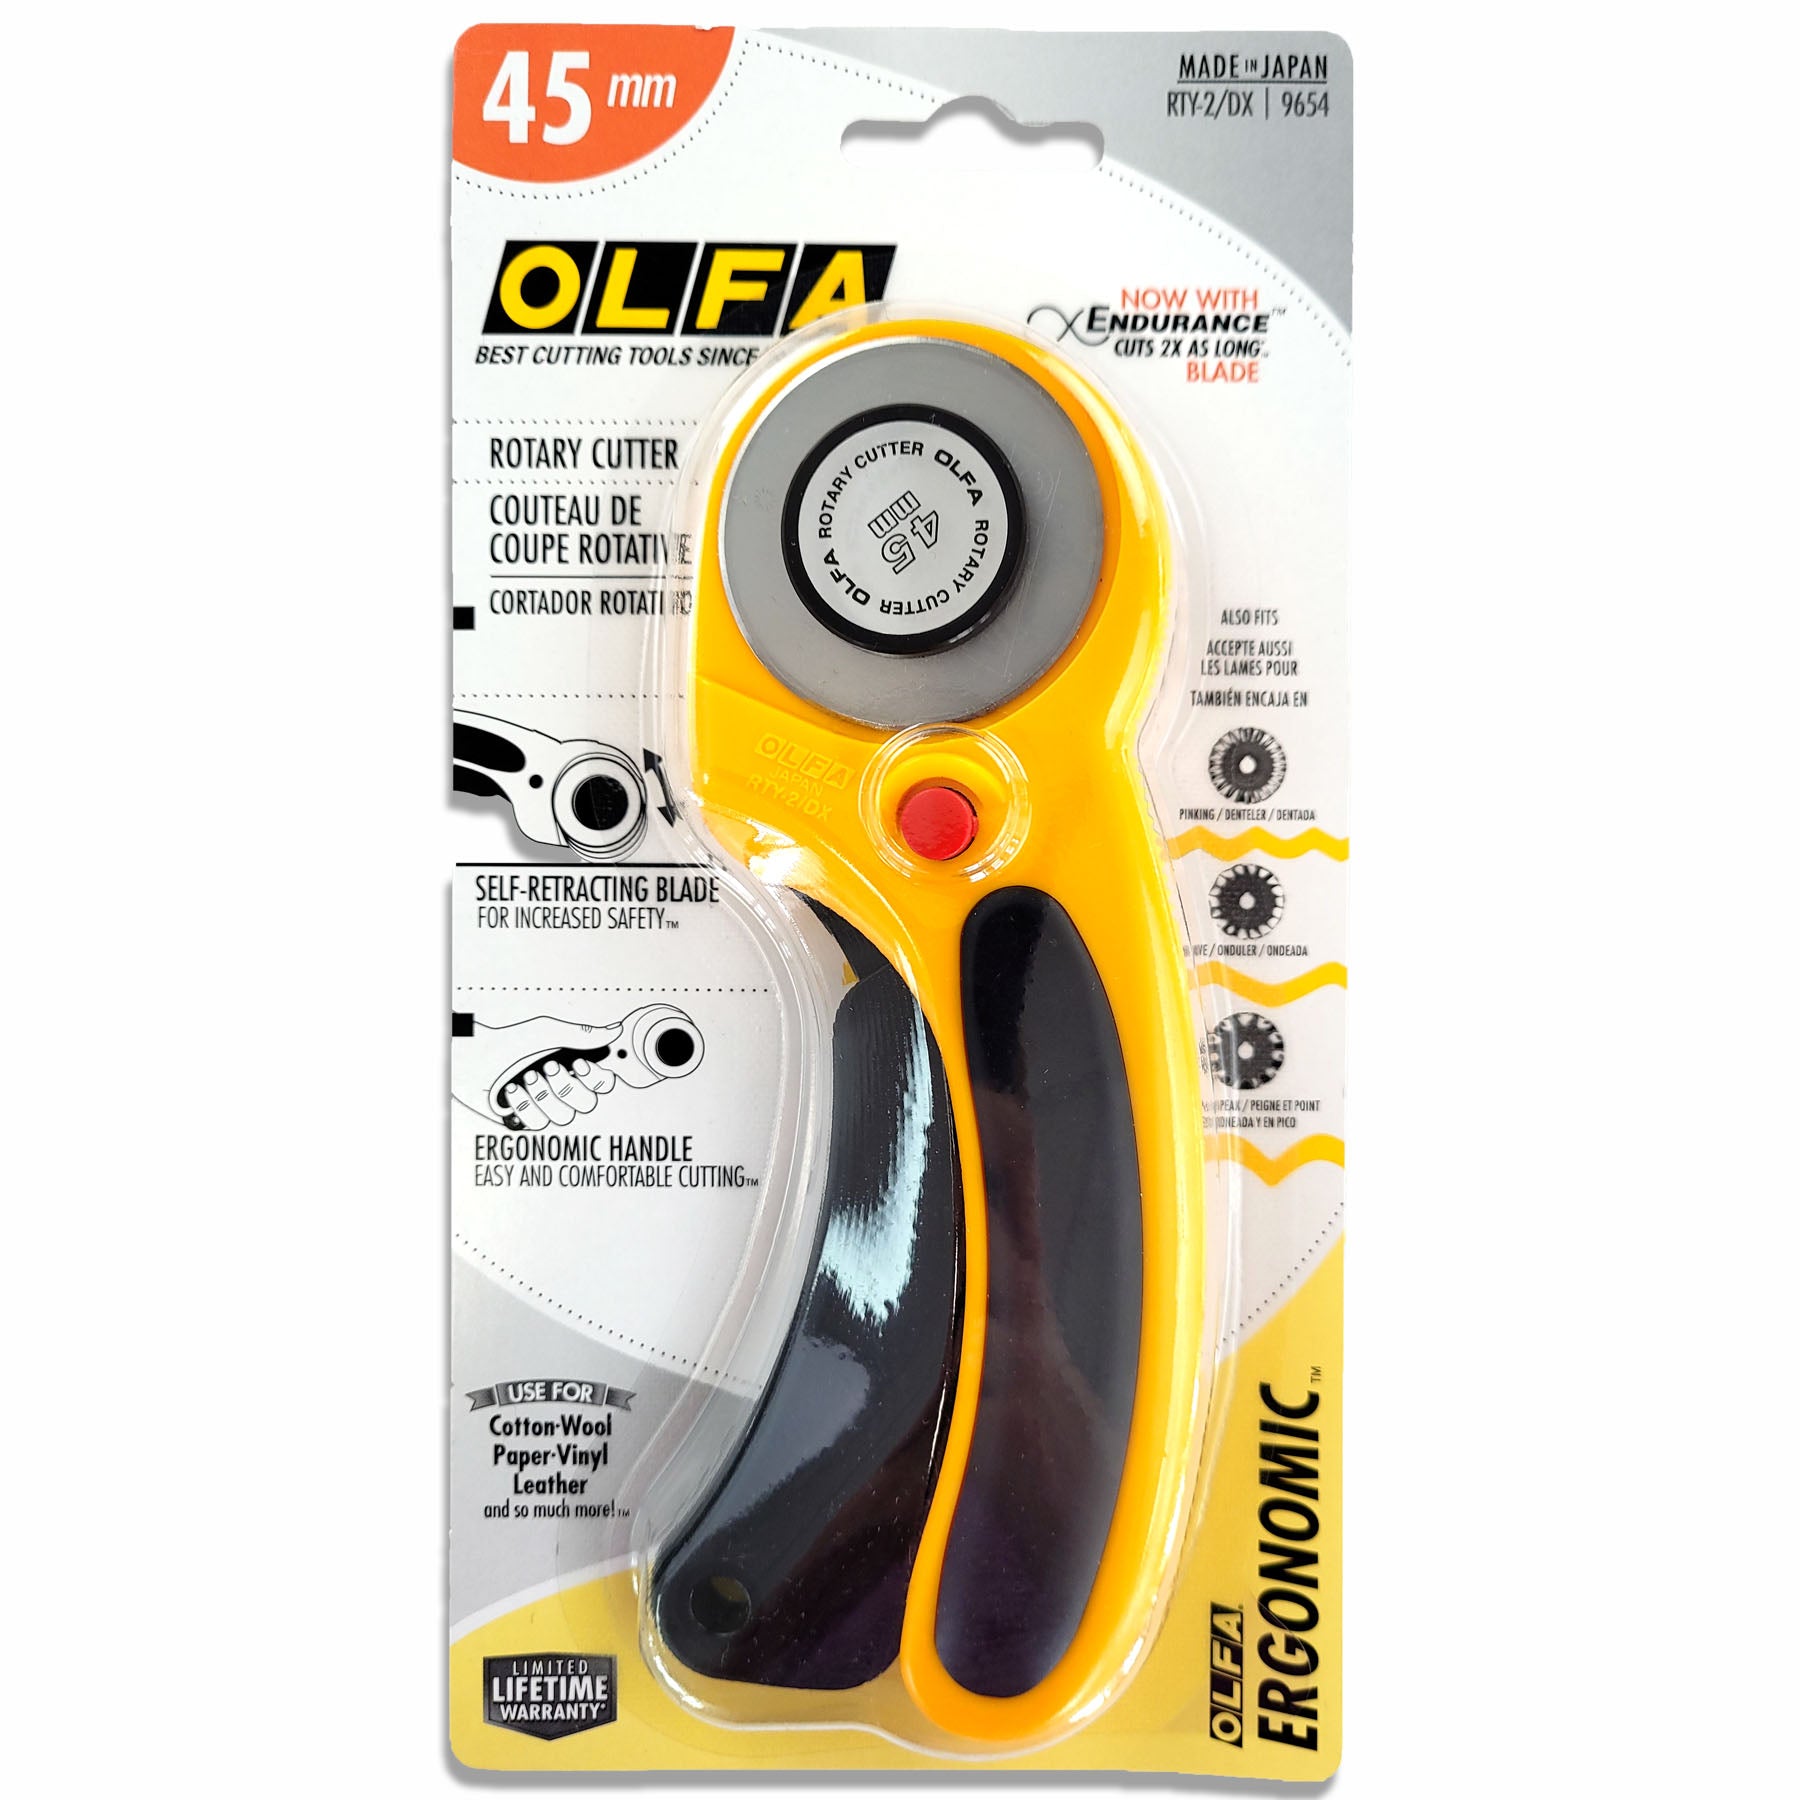 Olfa Rotary Cutter RTY-3/DX 60mm Ergonomic Handle with Free 2 Rotary Blade